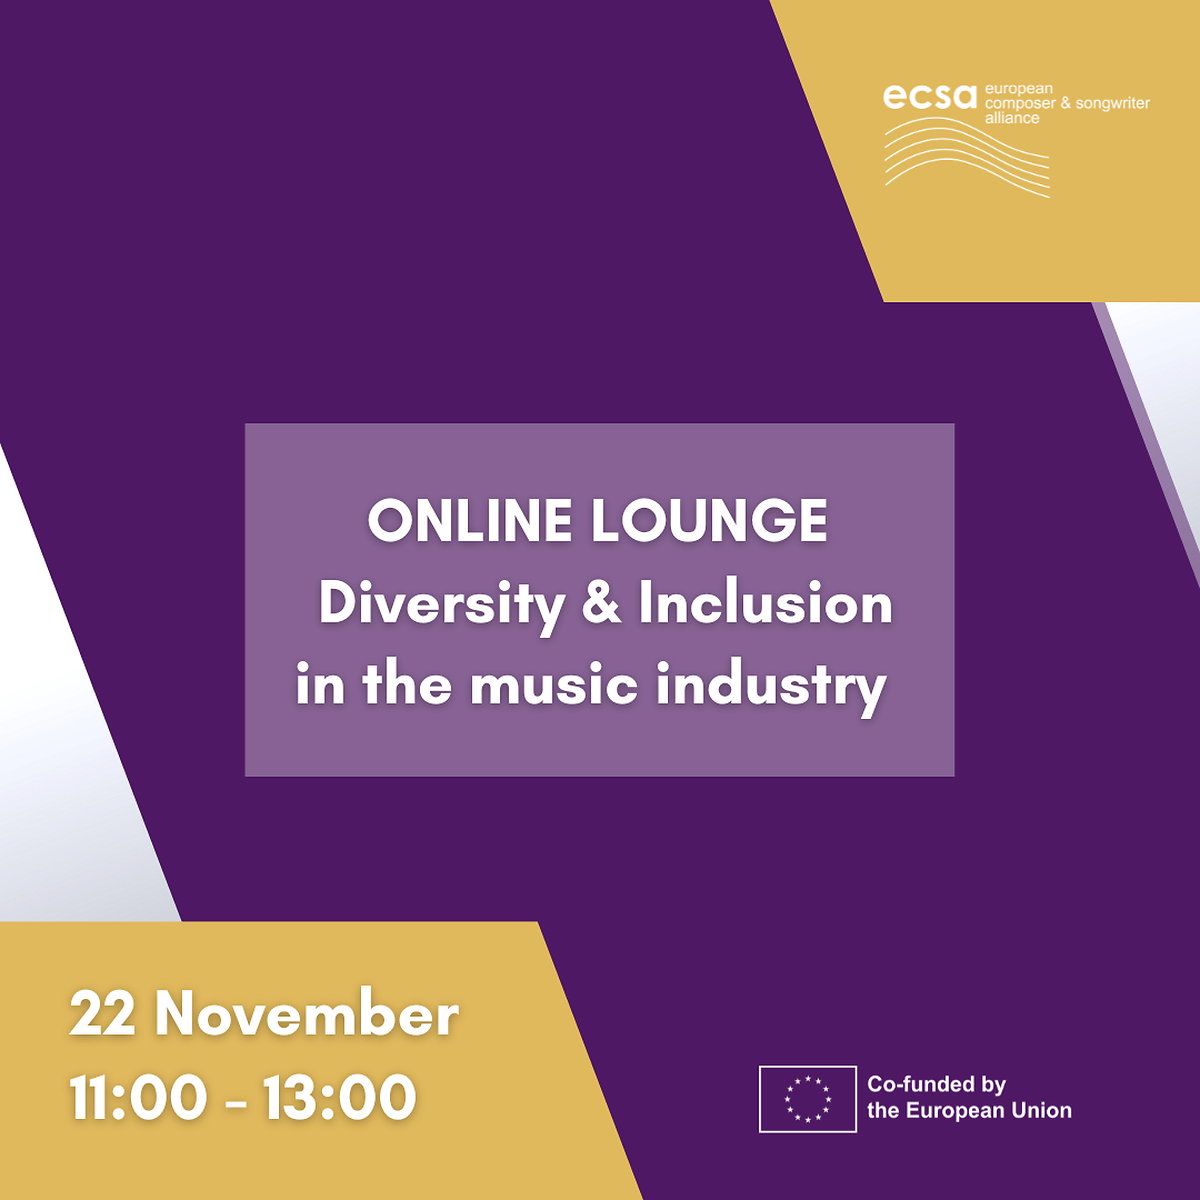 Online Lounge: Diversity & Inclusion in the music industry